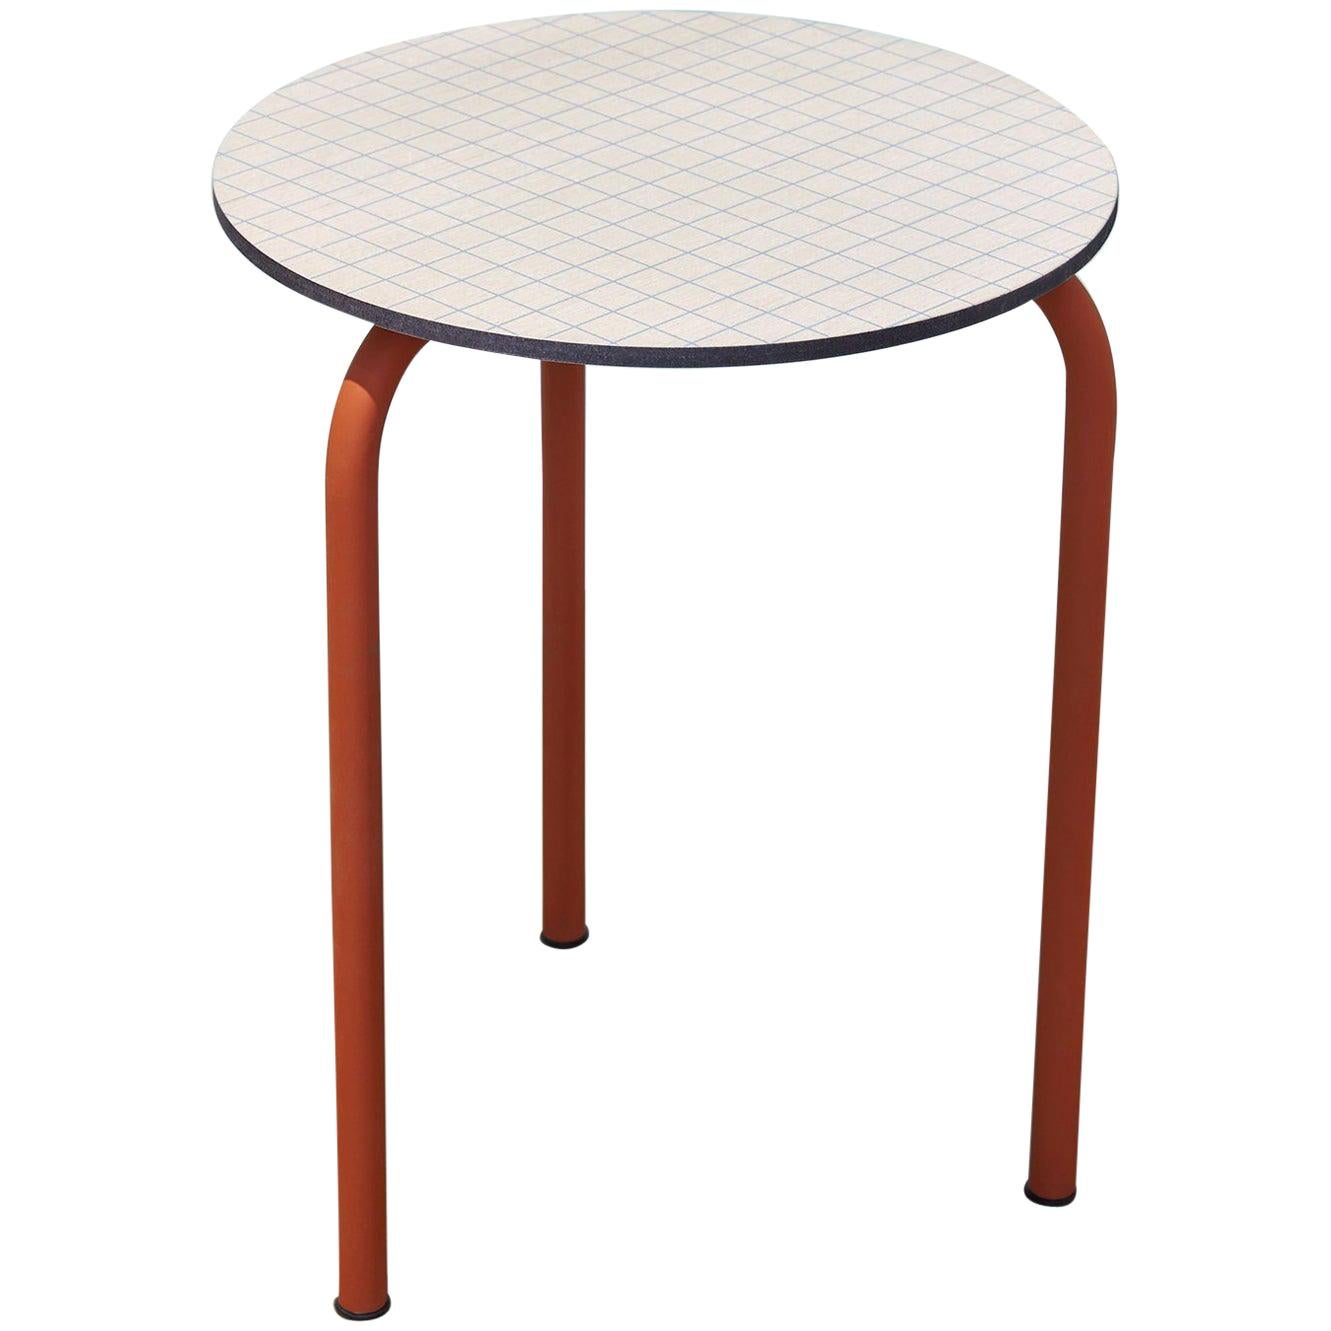 Contemporary Small Table Check Surface Texture Printed, Bauhaus-Inspired im Angebot